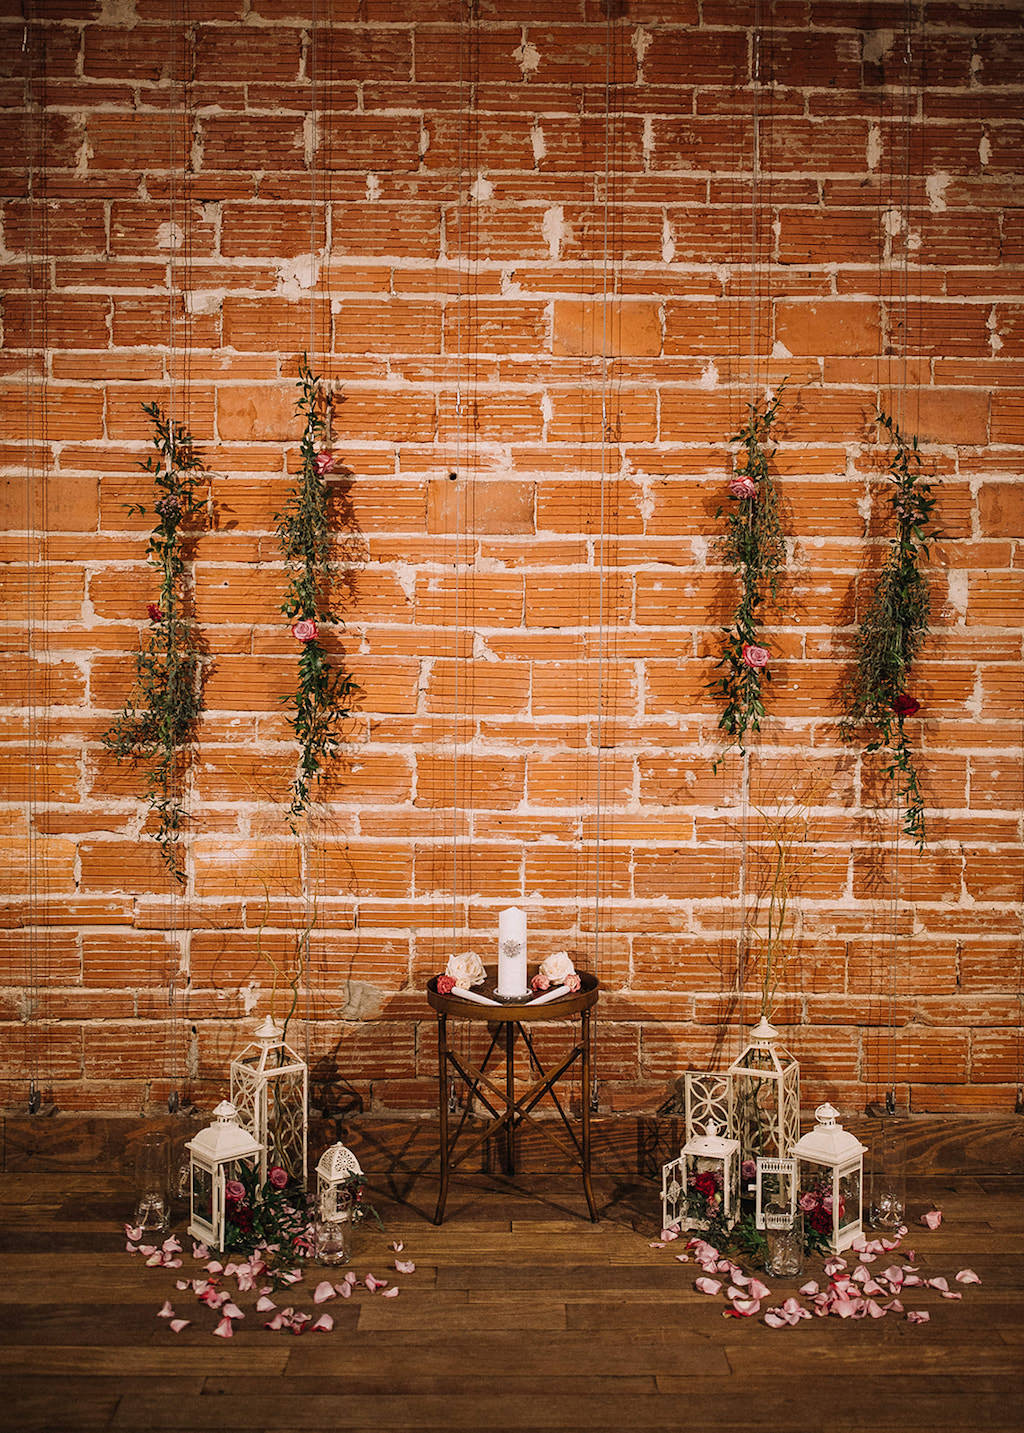 Romantic Boho Ceremony Backdrop, White Unity Candle, Vintage White Lanterns with Red Roses and Glass Liquid Candles, Hanging Greenery and Roses in front of Red Exposed Brick Wall | Downtown St. Pete Wedding Venue NOVA 535